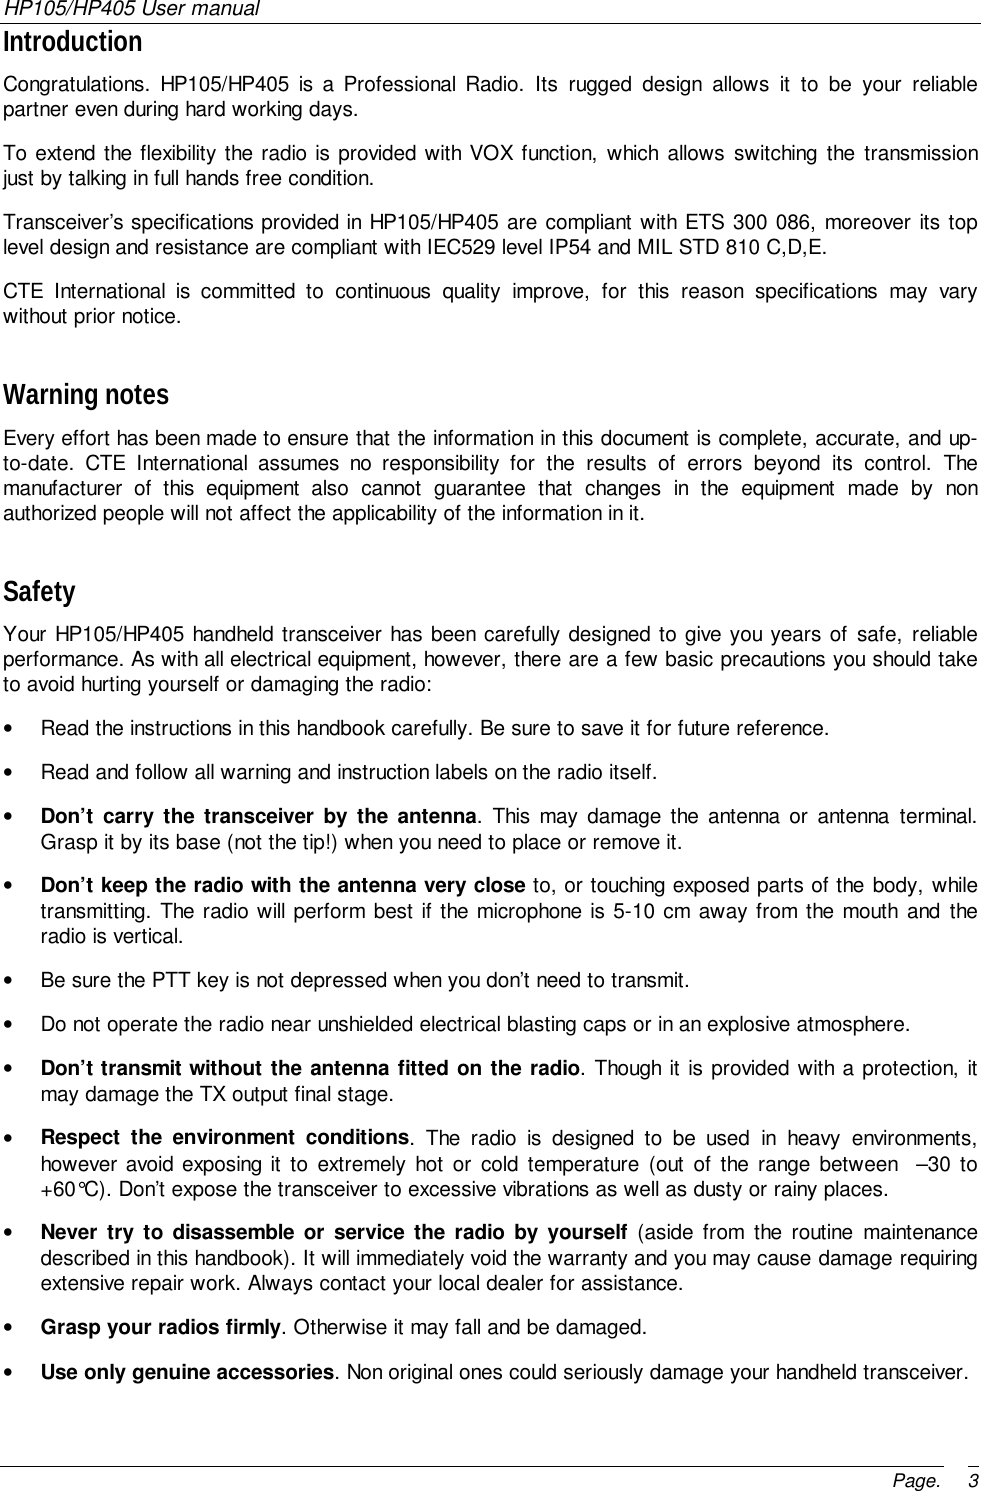 HP105/HP405 User manualPage. 3IntroductionCongratulations. HP105/HP405 is a Professional Radio. Its rugged design allows it to be your reliablepartner even during hard working days.To extend the flexibility the radio is provided with VOX function, which allows switching the transmissionjust by talking in full hands free condition.Transceiver’s specifications provided in HP105/HP405 are compliant with ETS 300 086, moreover its toplevel design and resistance are compliant with IEC529 level IP54 and MIL STD 810 C,D,E.CTE International is committed to continuous quality improve, for this reason specifications may varywithout prior notice.Warning notesEvery effort has been made to ensure that the information in this document is complete, accurate, and up-to-date. CTE International assumes no responsibility for the results of errors beyond its control. Themanufacturer of this equipment also cannot guarantee that changes in the equipment made by nonauthorized people will not affect the applicability of the information in it.SafetyYour HP105/HP405 handheld transceiver has been carefully designed to give you years of safe, reliableperformance. As with all electrical equipment, however, there are a few basic precautions you should taketo avoid hurting yourself or damaging the radio:•  Read the instructions in this handbook carefully. Be sure to save it for future reference.•  Read and follow all warning and instruction labels on the radio itself.• Don’t carry the transceiver by the antenna. This may damage the antenna or antenna terminal.Grasp it by its base (not the tip!) when you need to place or remove it.• Don’t keep the radio with the antenna very close to, or touching exposed parts of the body, whiletransmitting. The radio will perform best if the microphone is 5-10 cm away from the mouth and theradio is vertical.•  Be sure the PTT key is not depressed when you don’t need to transmit.•  Do not operate the radio near unshielded electrical blasting caps or in an explosive atmosphere.• Don’t transmit without the antenna fitted on the radio. Though it is provided with a protection, itmay damage the TX output final stage.• Respect the environment conditions. The radio is designed to be used in heavy environments,however avoid exposing it to extremely hot or cold temperature (out of the range between  –30 to+60°C). Don’t expose the transceiver to excessive vibrations as well as dusty or rainy places.• Never try to disassemble or service the radio by yourself (aside from the routine maintenancedescribed in this handbook). It will immediately void the warranty and you may cause damage requiringextensive repair work. Always contact your local dealer for assistance.• Grasp your radios firmly. Otherwise it may fall and be damaged.• Use only genuine accessories. Non original ones could seriously damage your handheld transceiver.